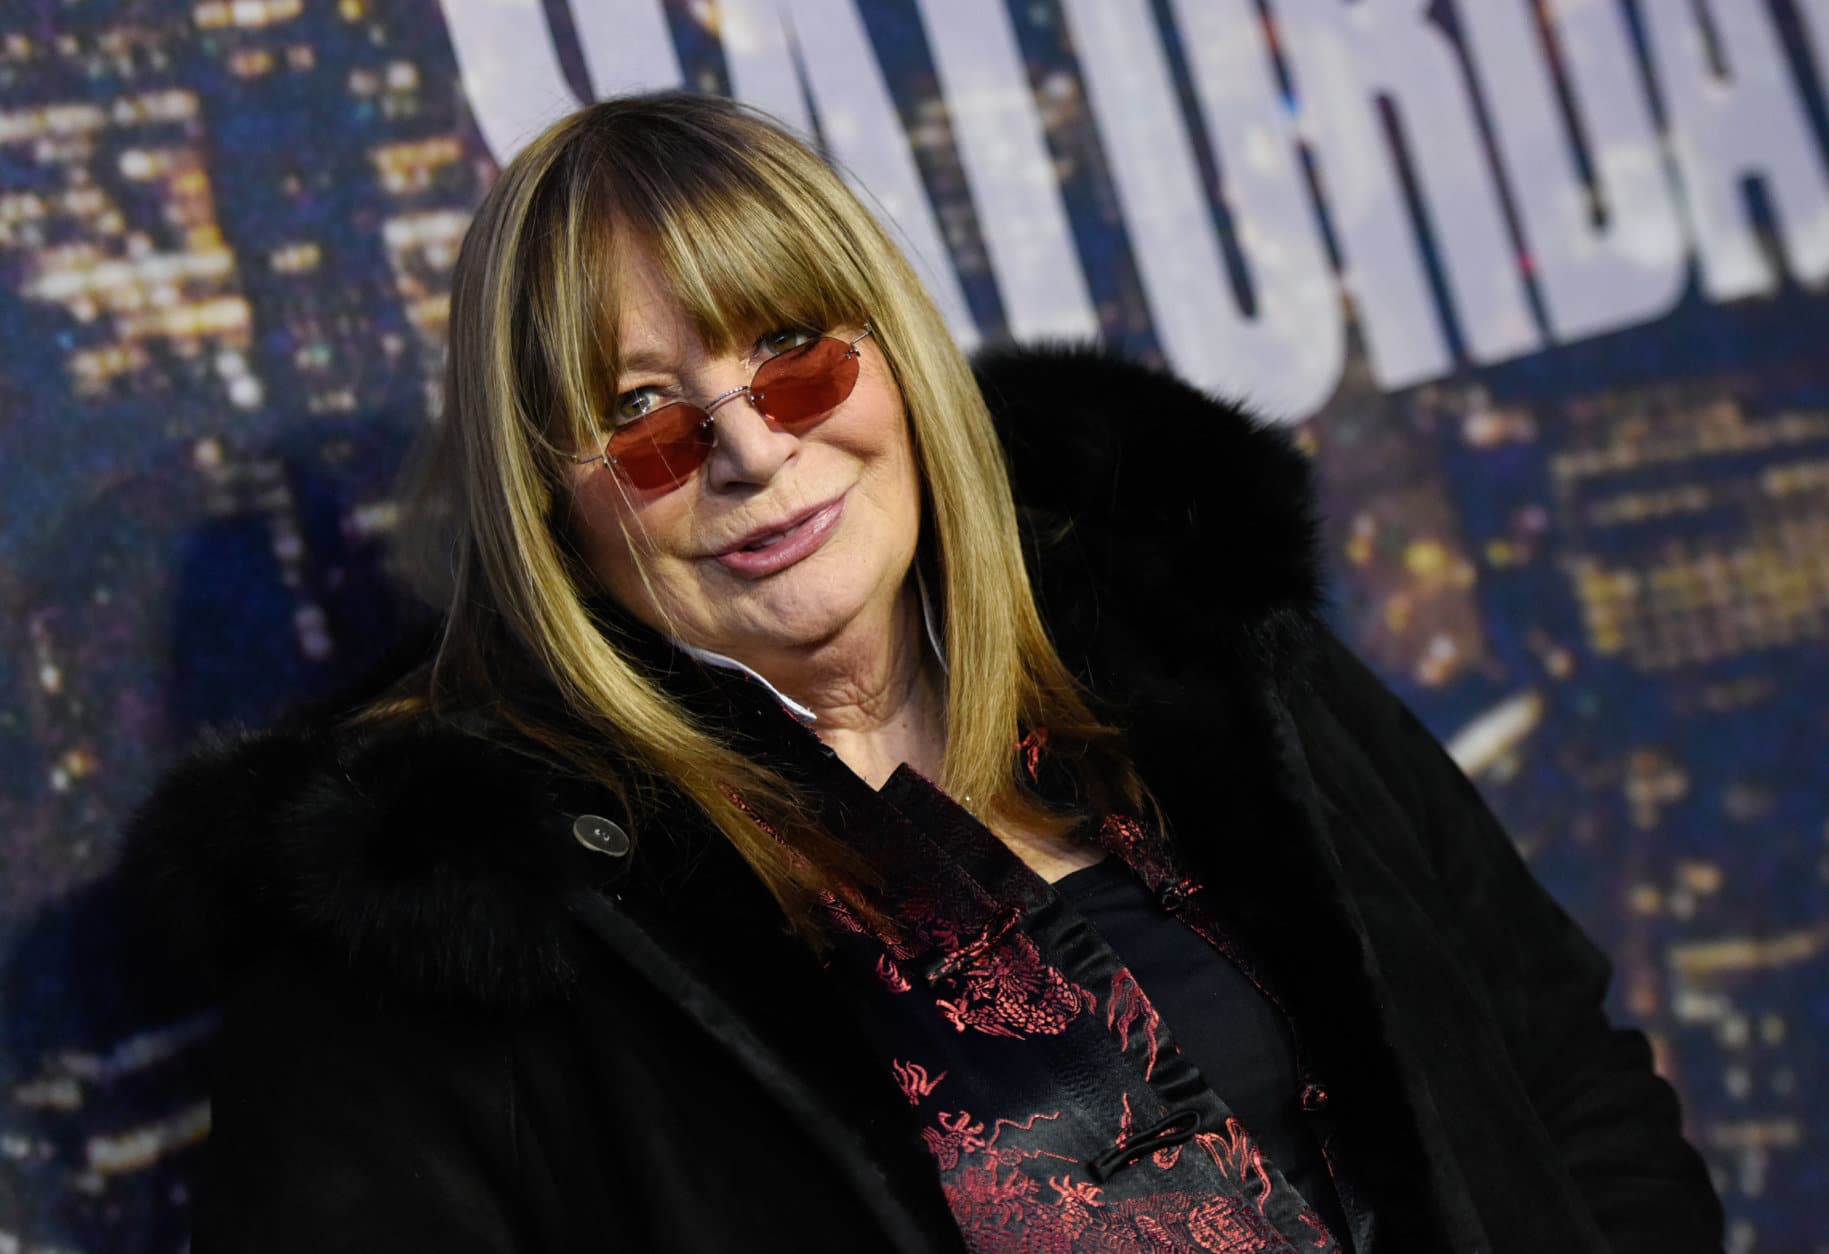 Penny Marshall attends the SNL 40th Anniversary Special at Rockefeller Plaza on Sunday, Feb. 15, 2015, in New York. (Photo by Evan Agostini/Invision/AP)